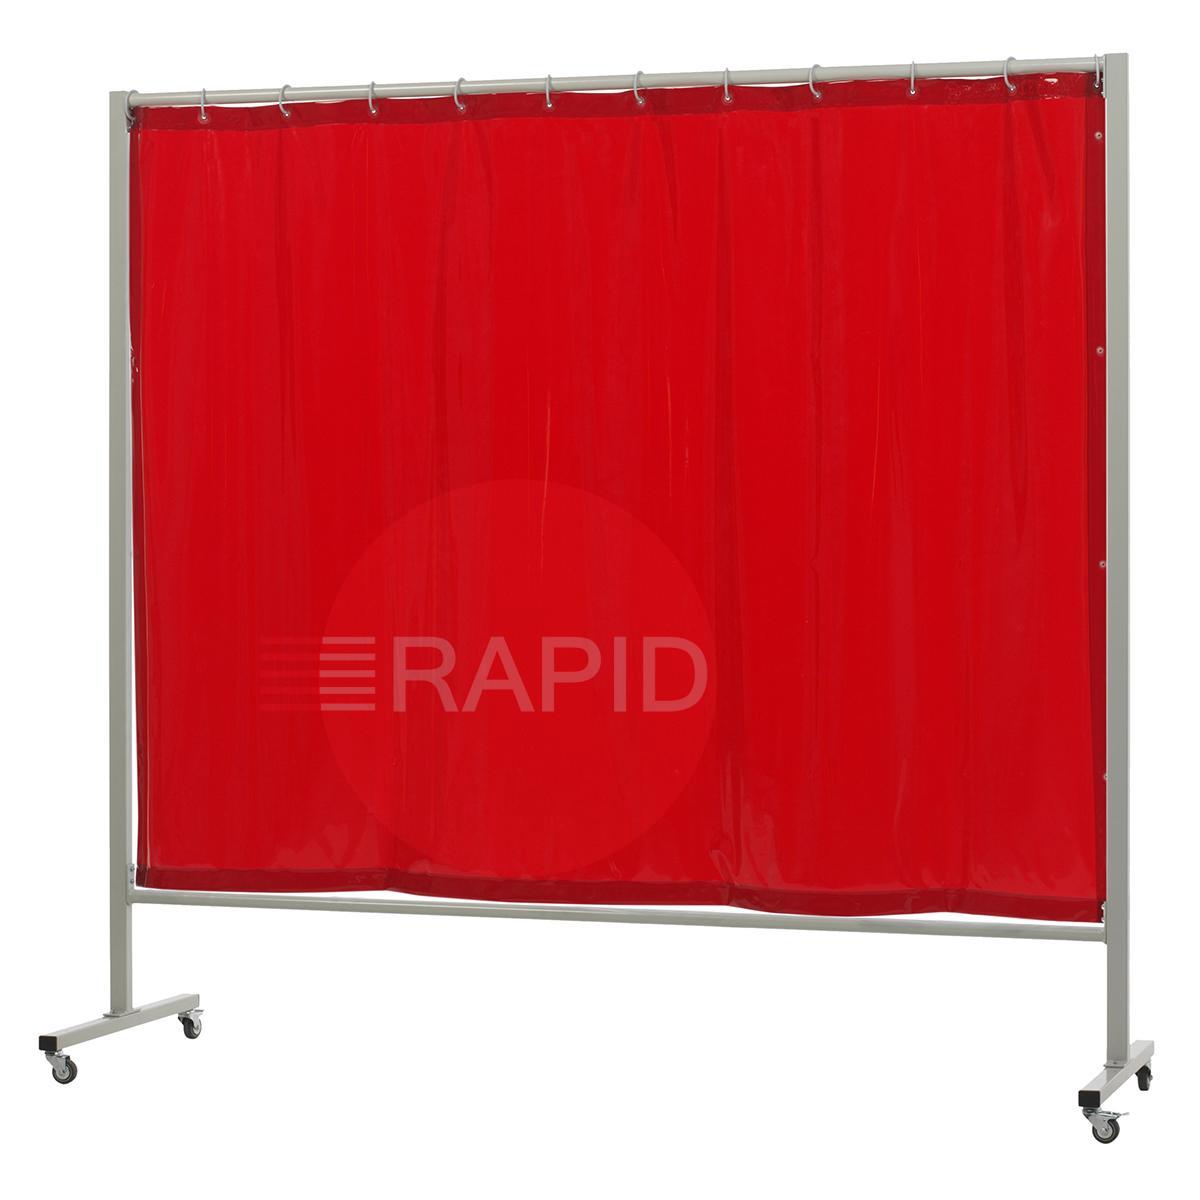 36.34.15  CEPRO Omnium Single Welding Screen, with Orange-CE Curtain - 2.2m Wide x 2m High, Approved EN 25980